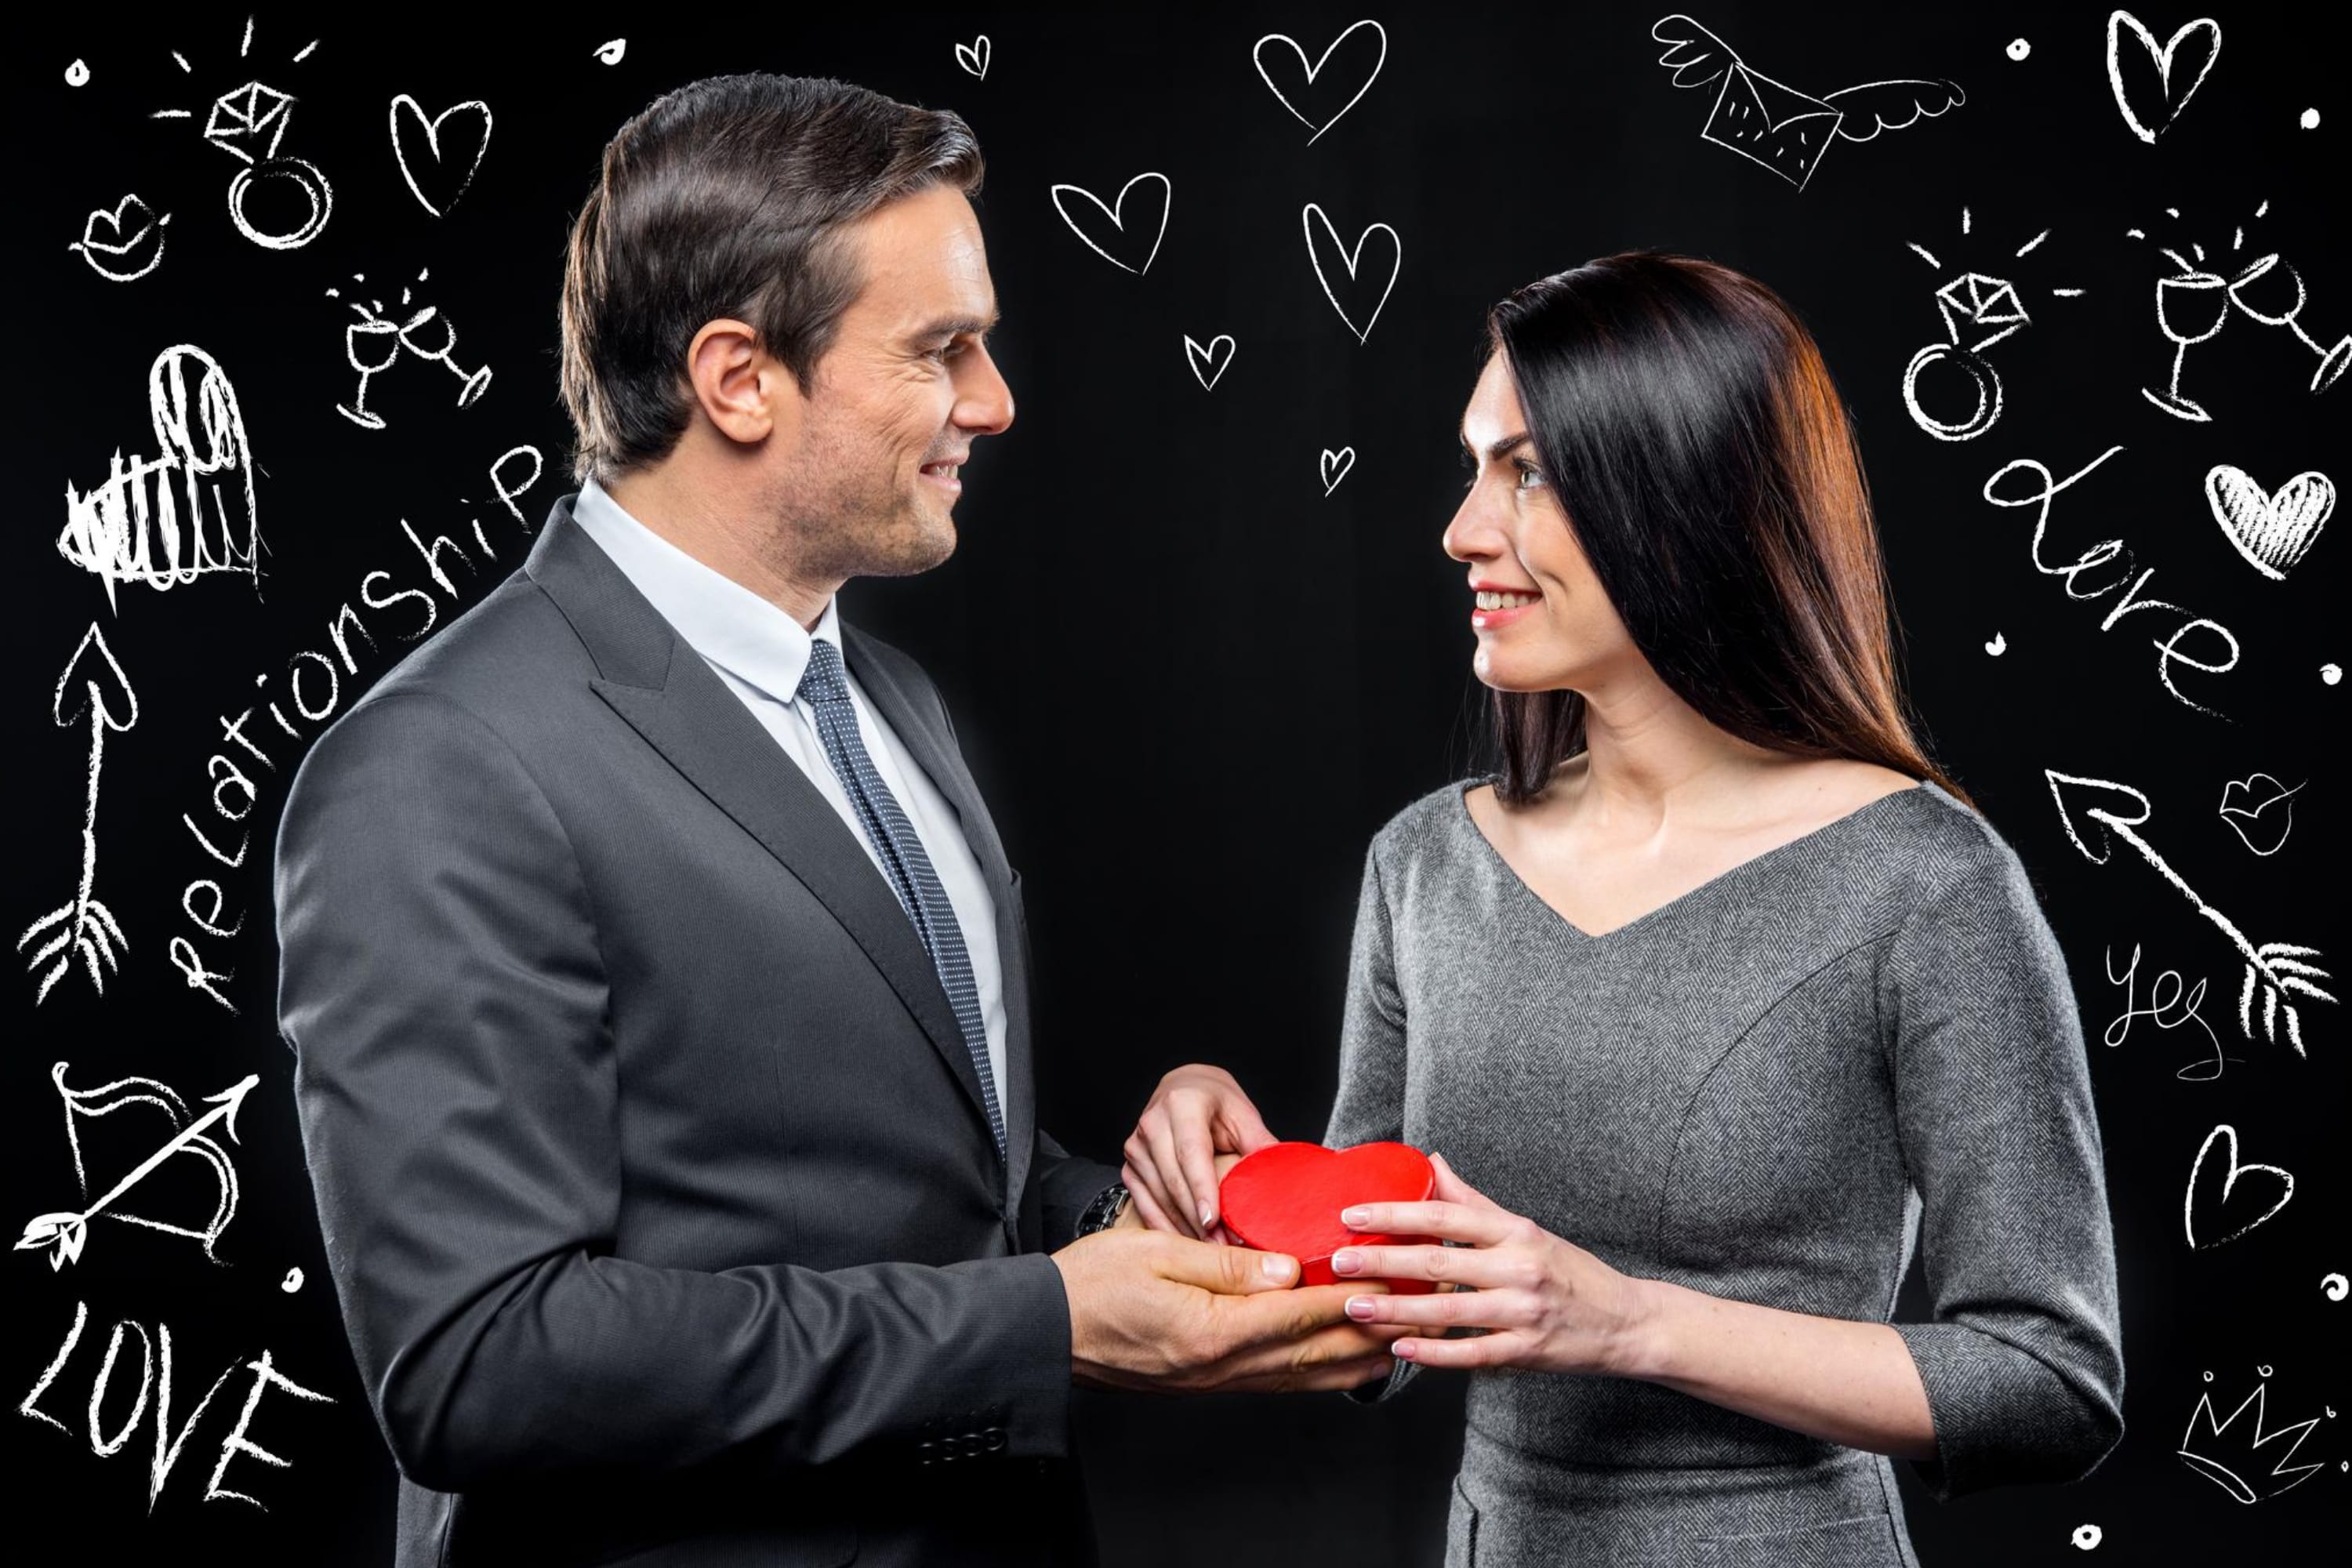 How to Respond to Happy Valentine’s Day From Family Members and Relatives